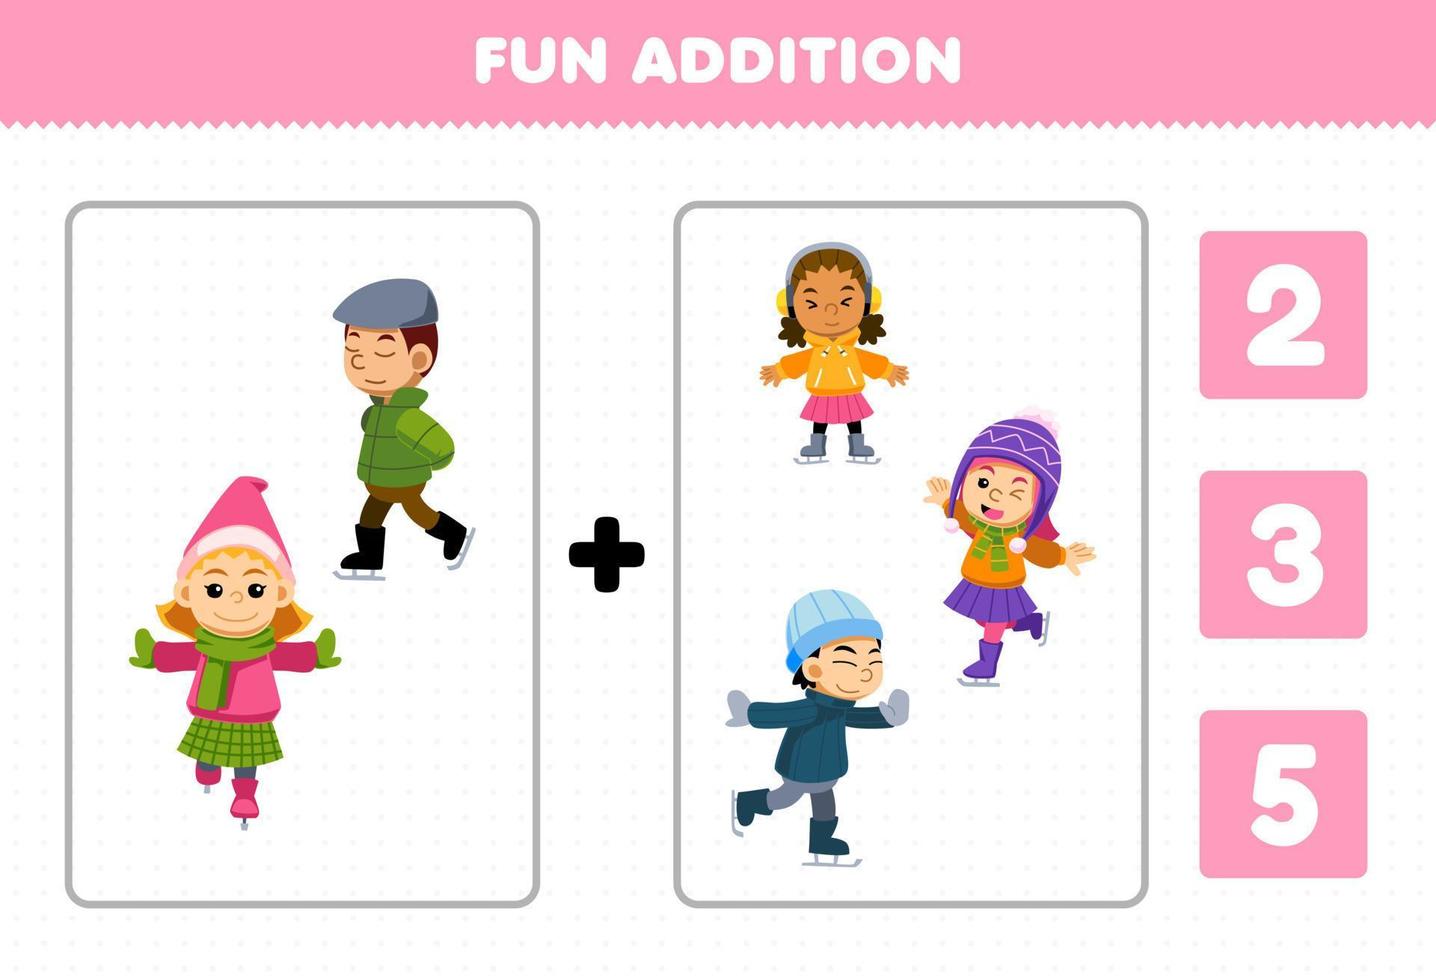 Education game for children fun addition by count and choose the correct answer of cute cartoon boy and girl playing ice skating printable winter worksheet vector